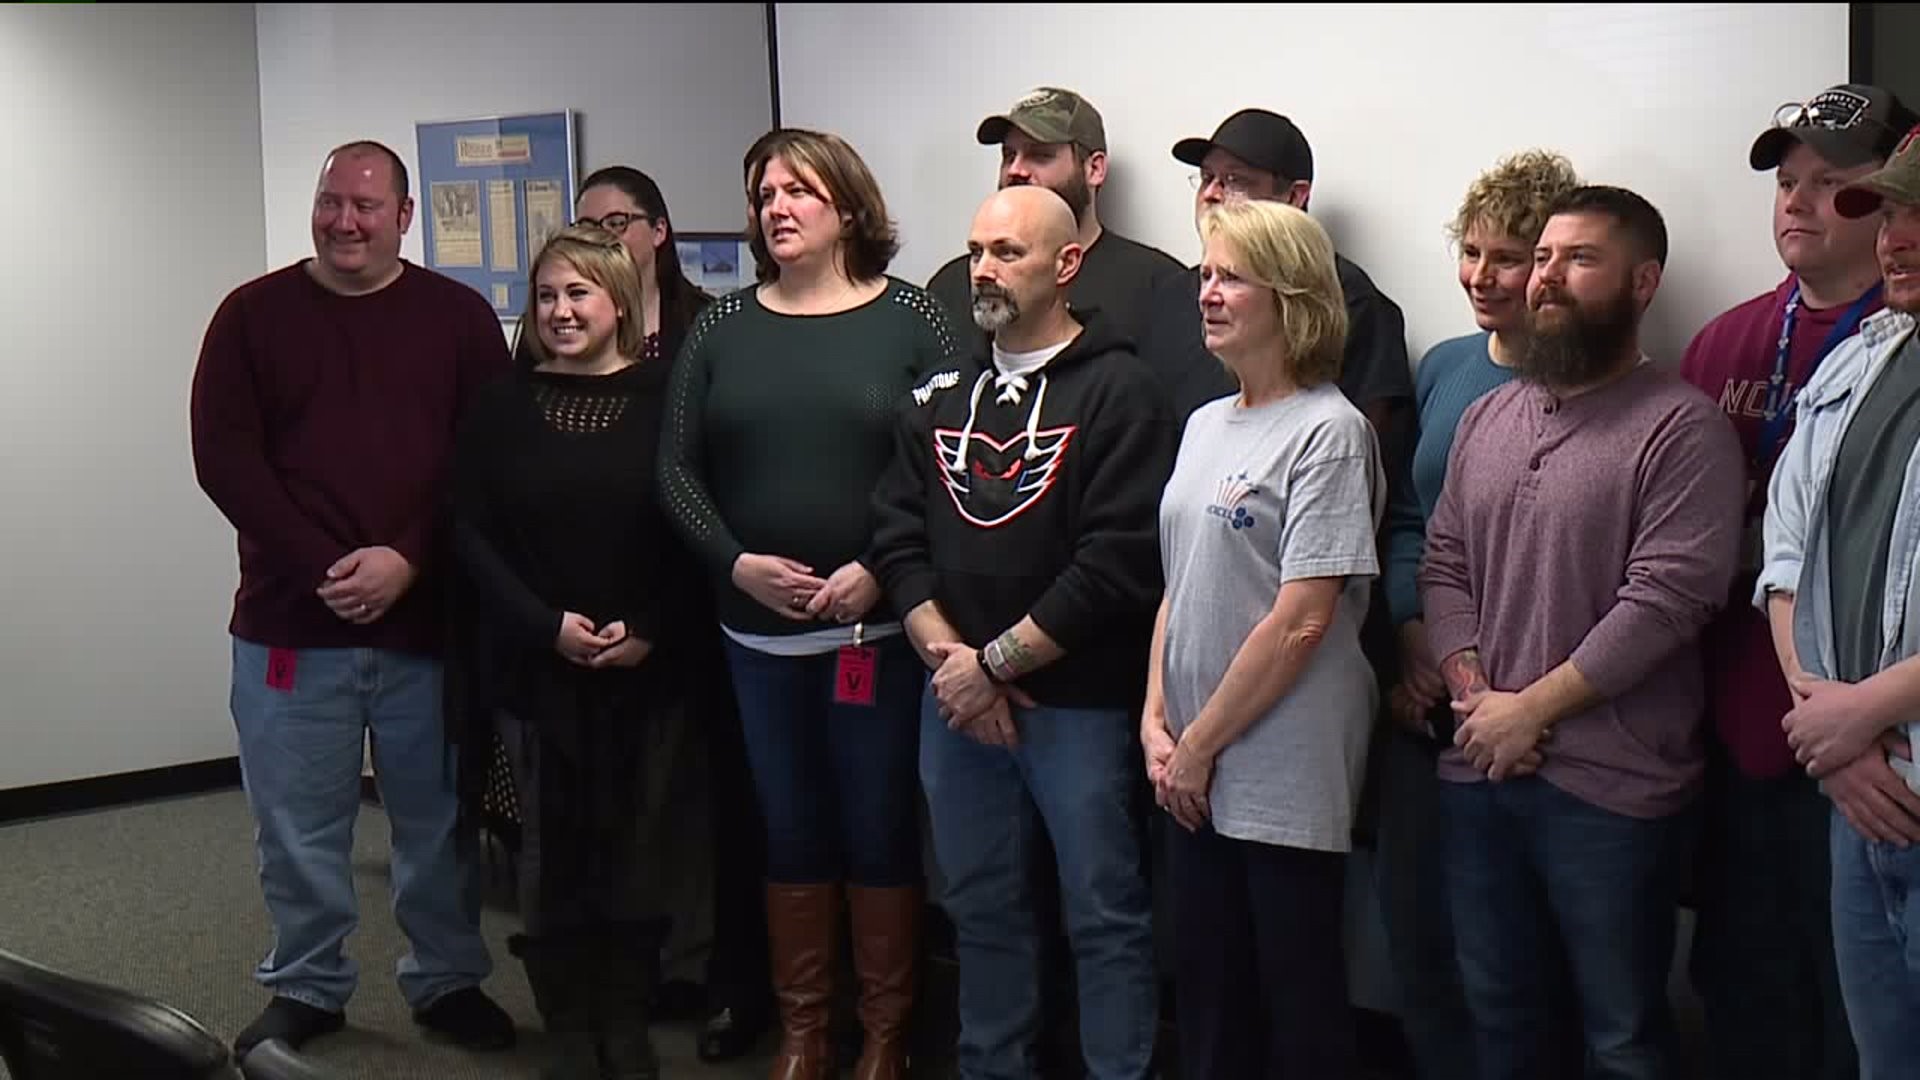 Workers Recognized for Saving a Life